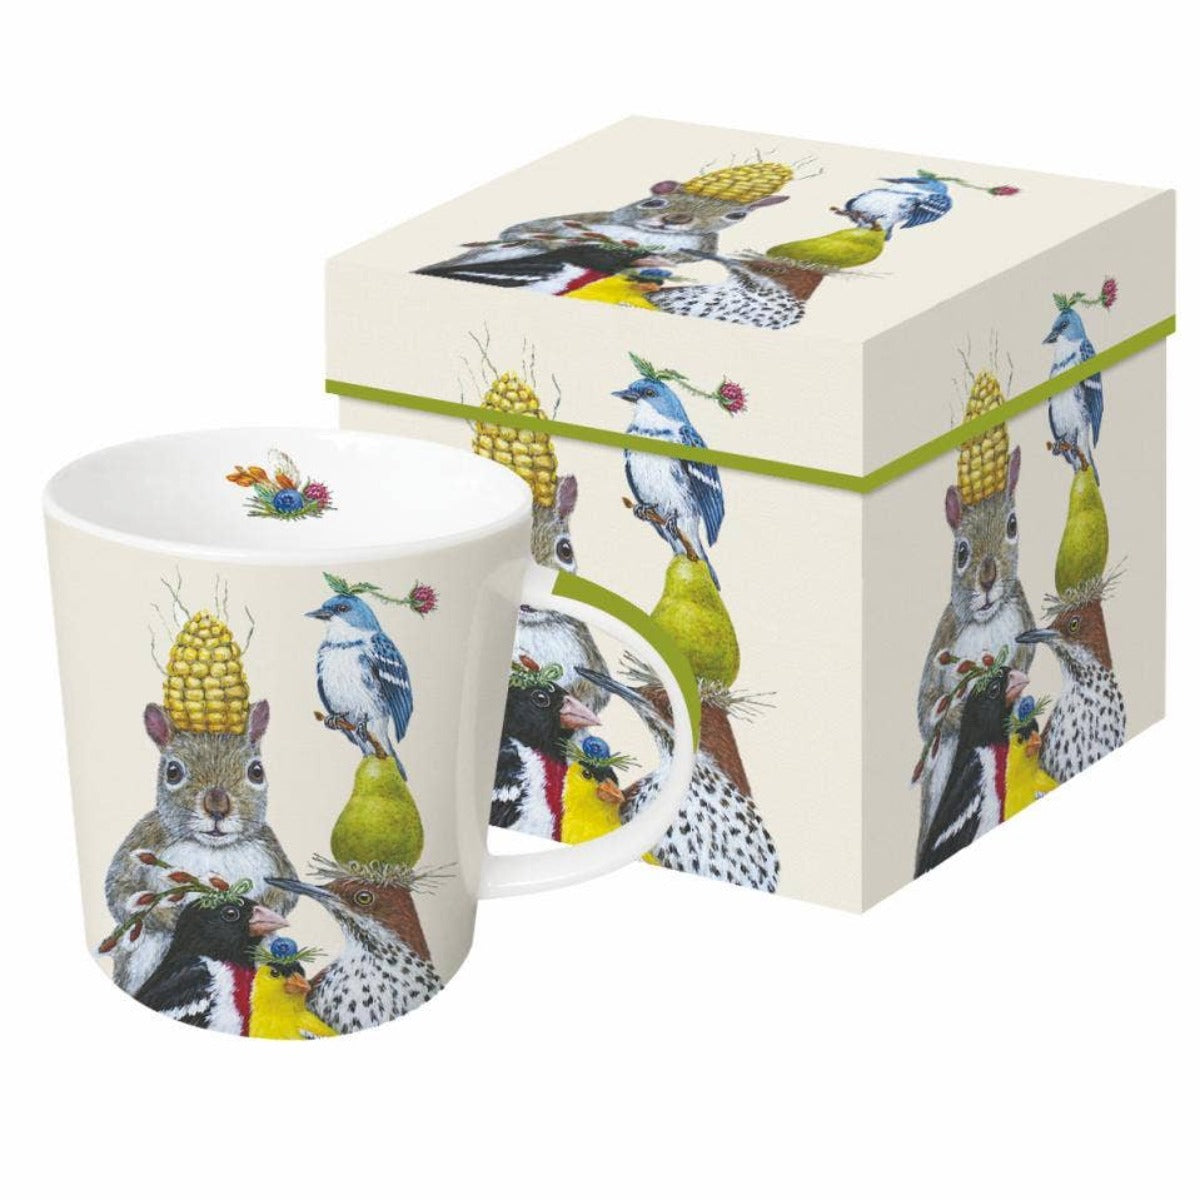 Party Under the Feeder Mug in Gift Box- Perfect gift for the nature lover